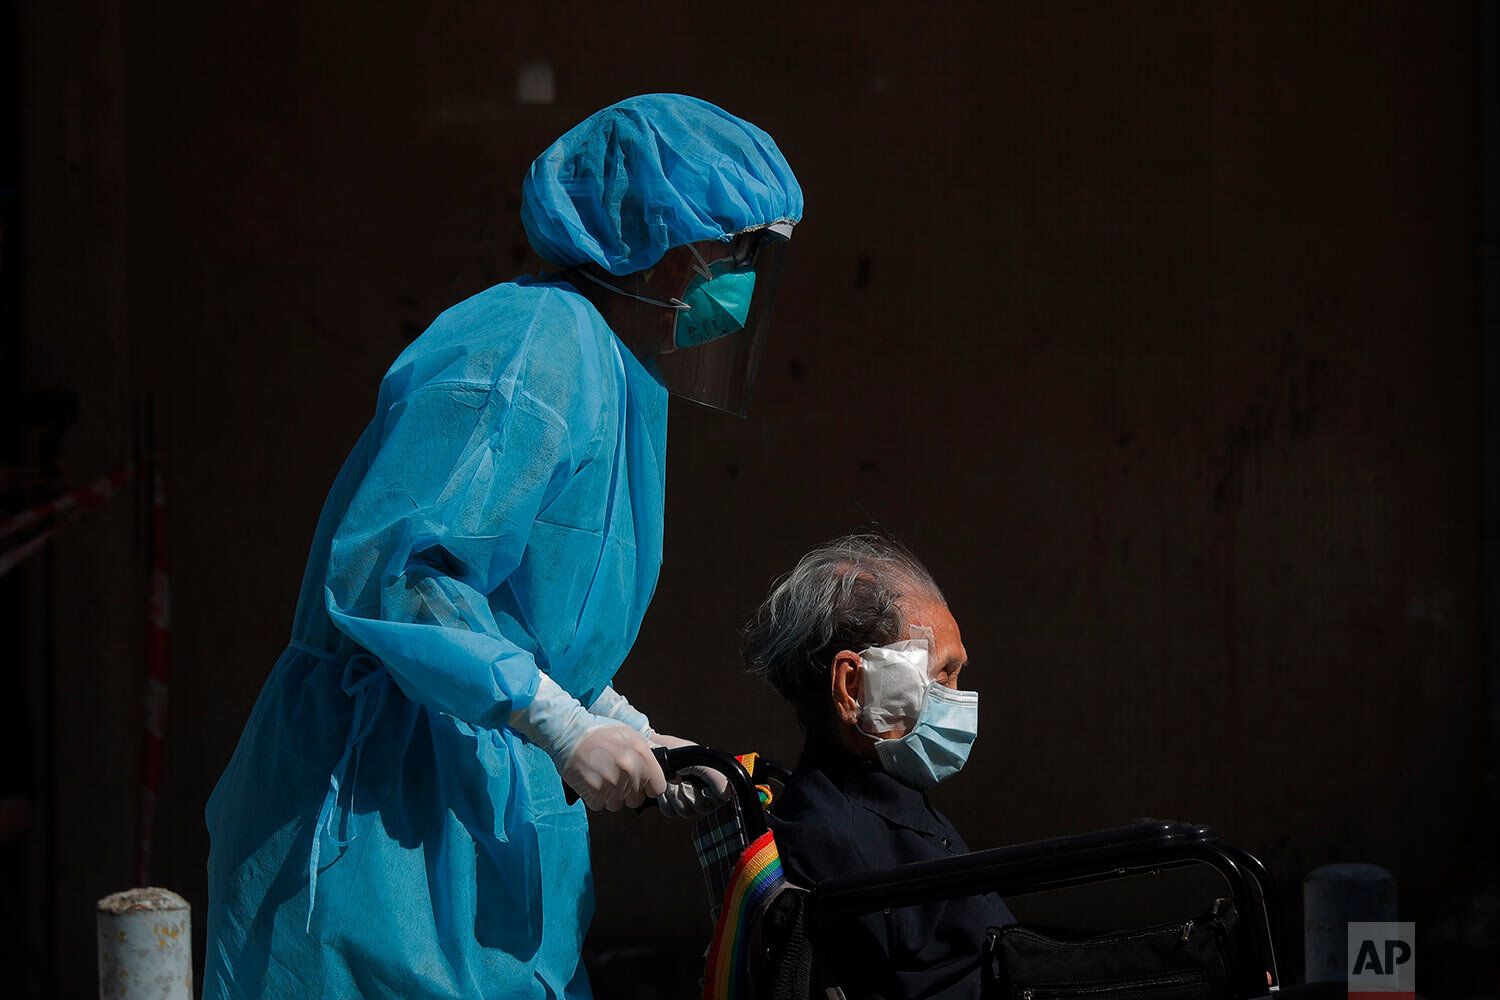  A resident of the nursing home "The Salvation Army Lung Hang Residence for Senior Citizens" is evacuated by medical staff from the Centre for Health Protection, after employees of the nursing home were found to have the coronavirus COVID-19, in Hong